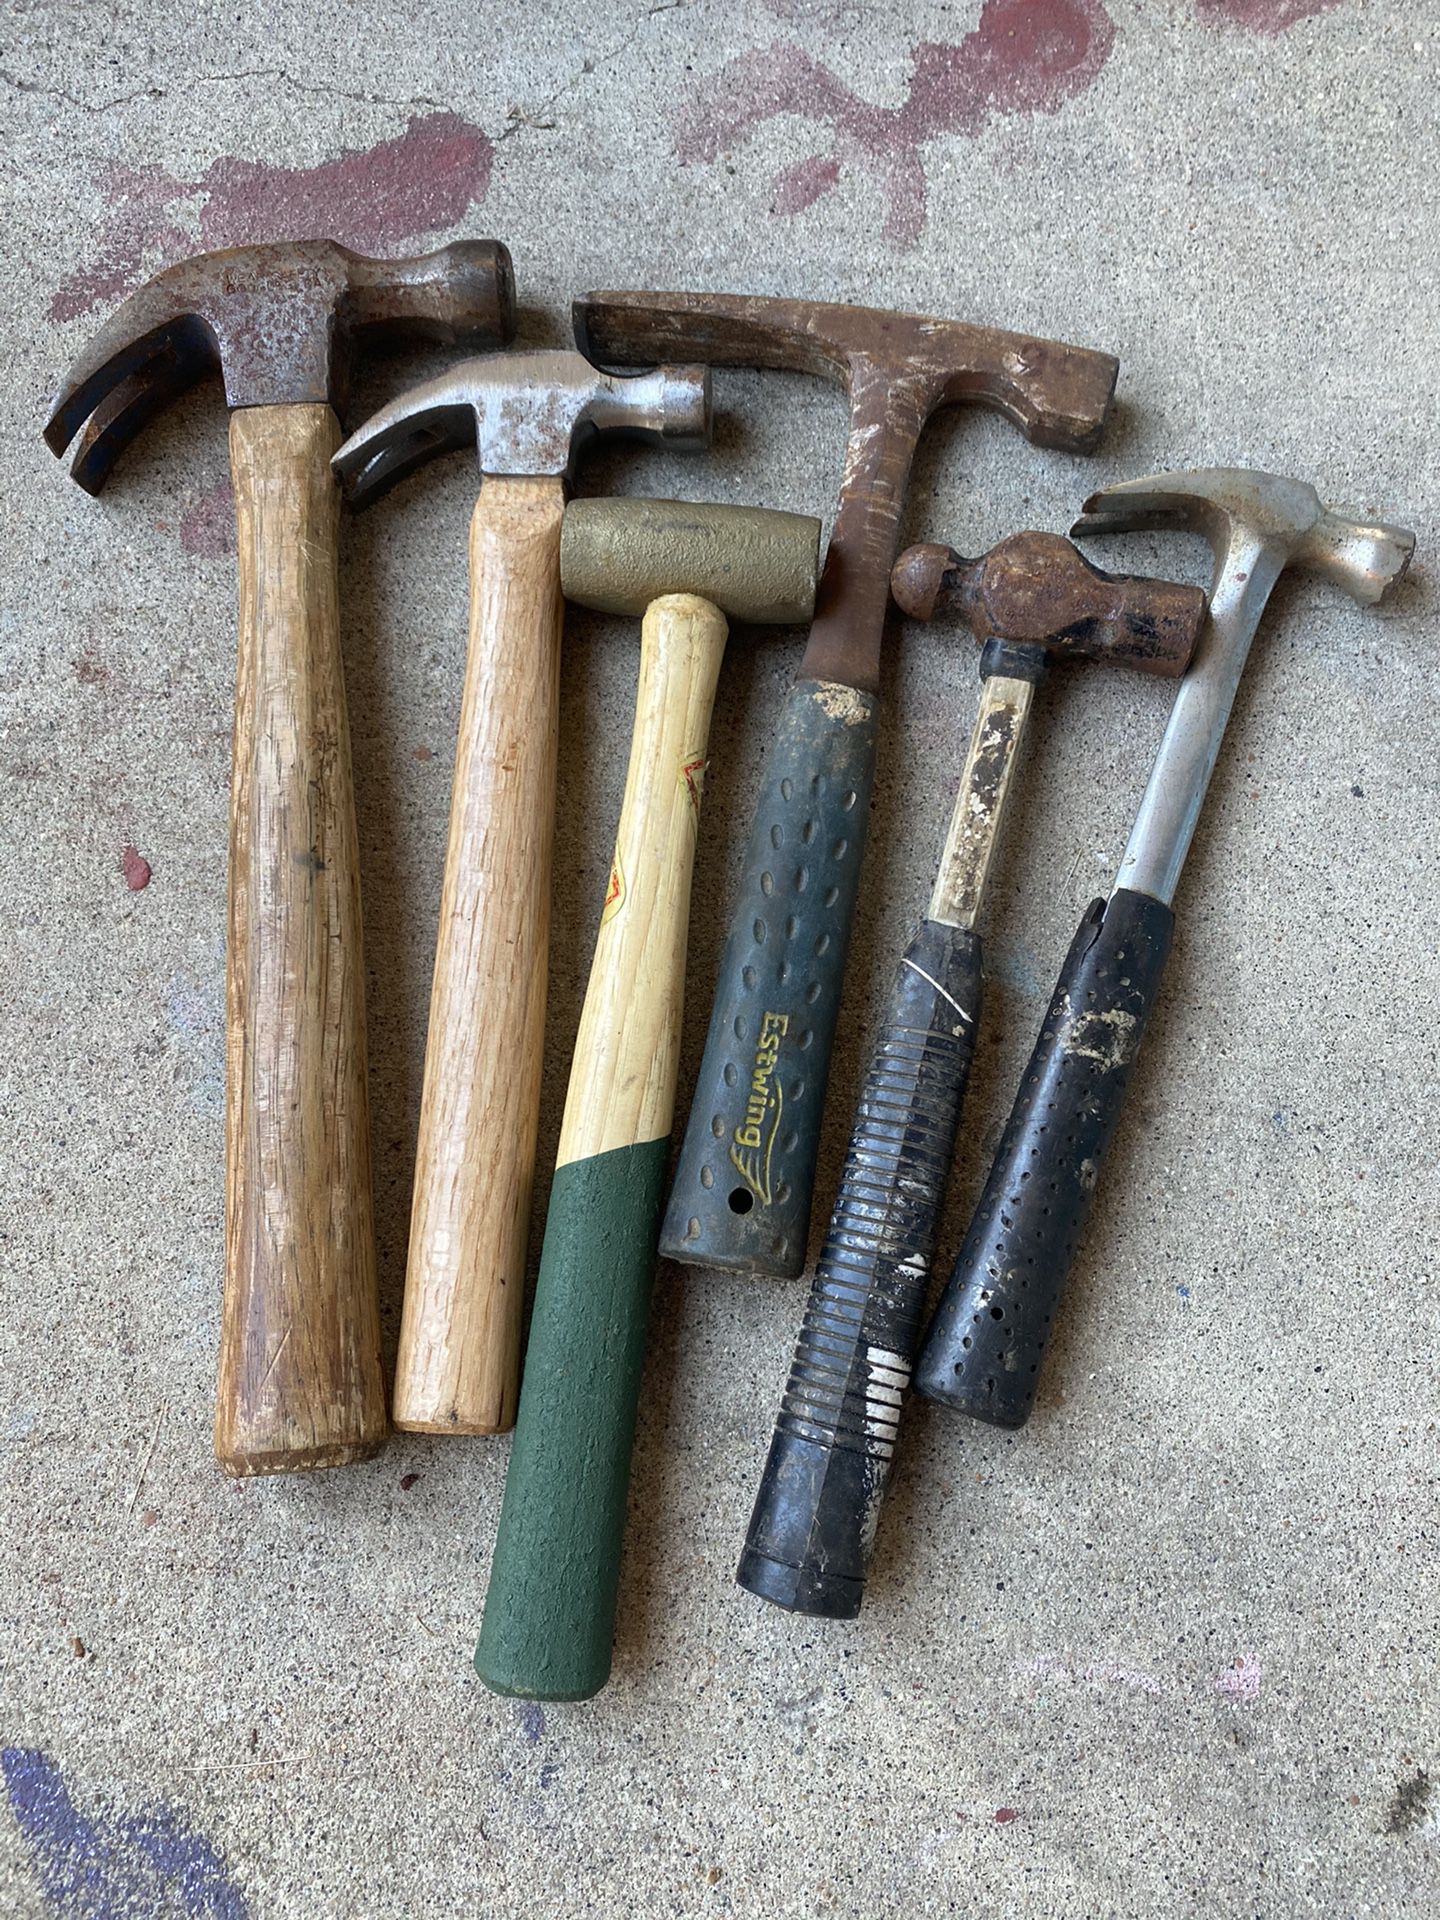 Hammers used